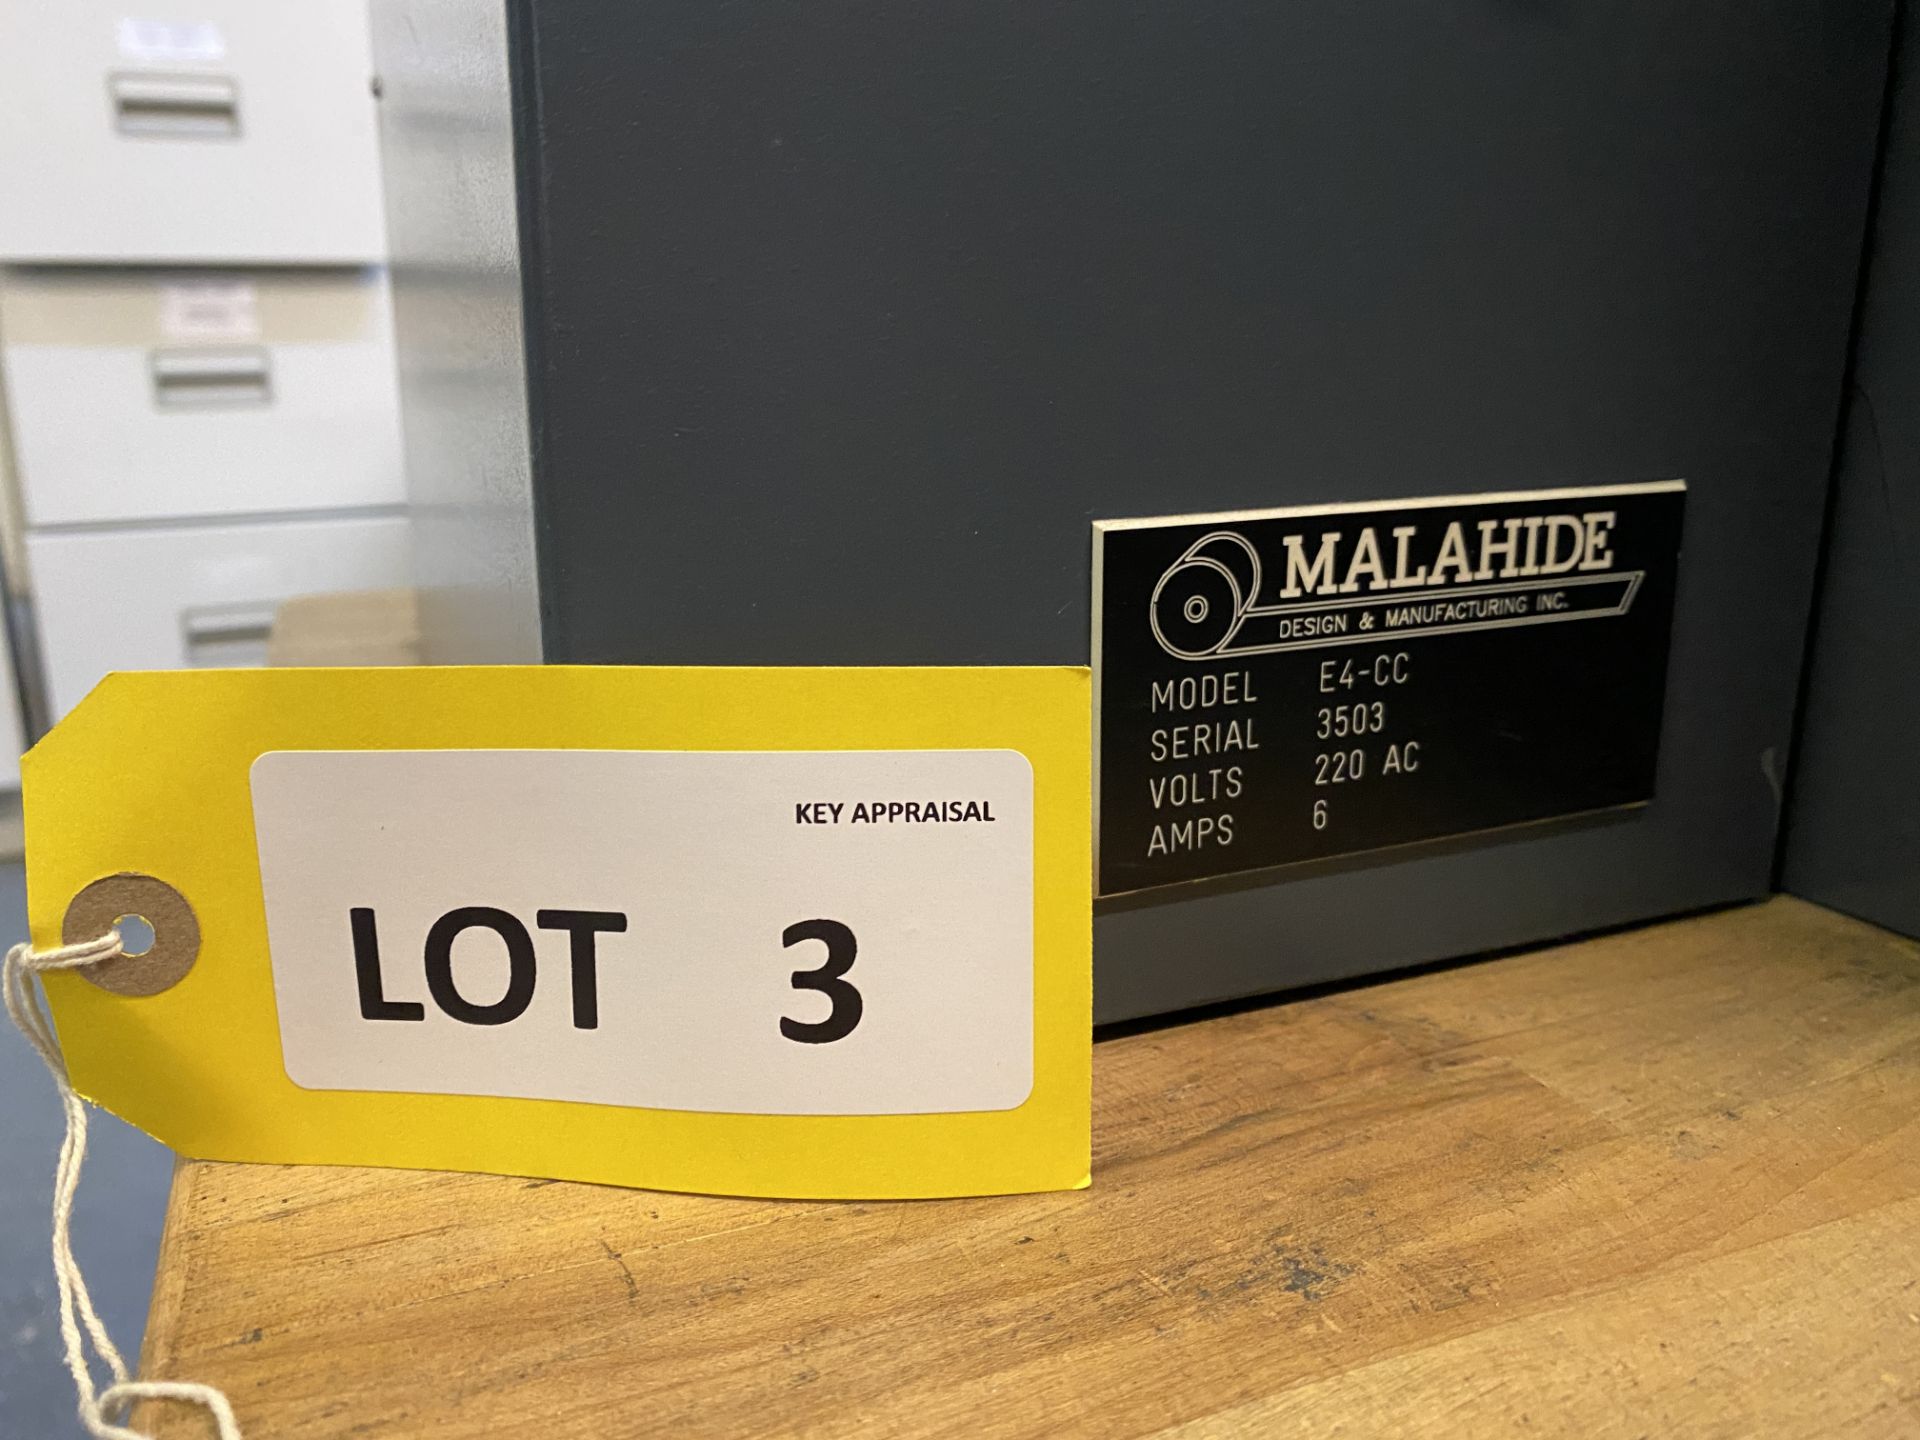 Malahide E4-CC plastic card hot foil stamping machine on stand, serial no: 3503 - Image 2 of 2